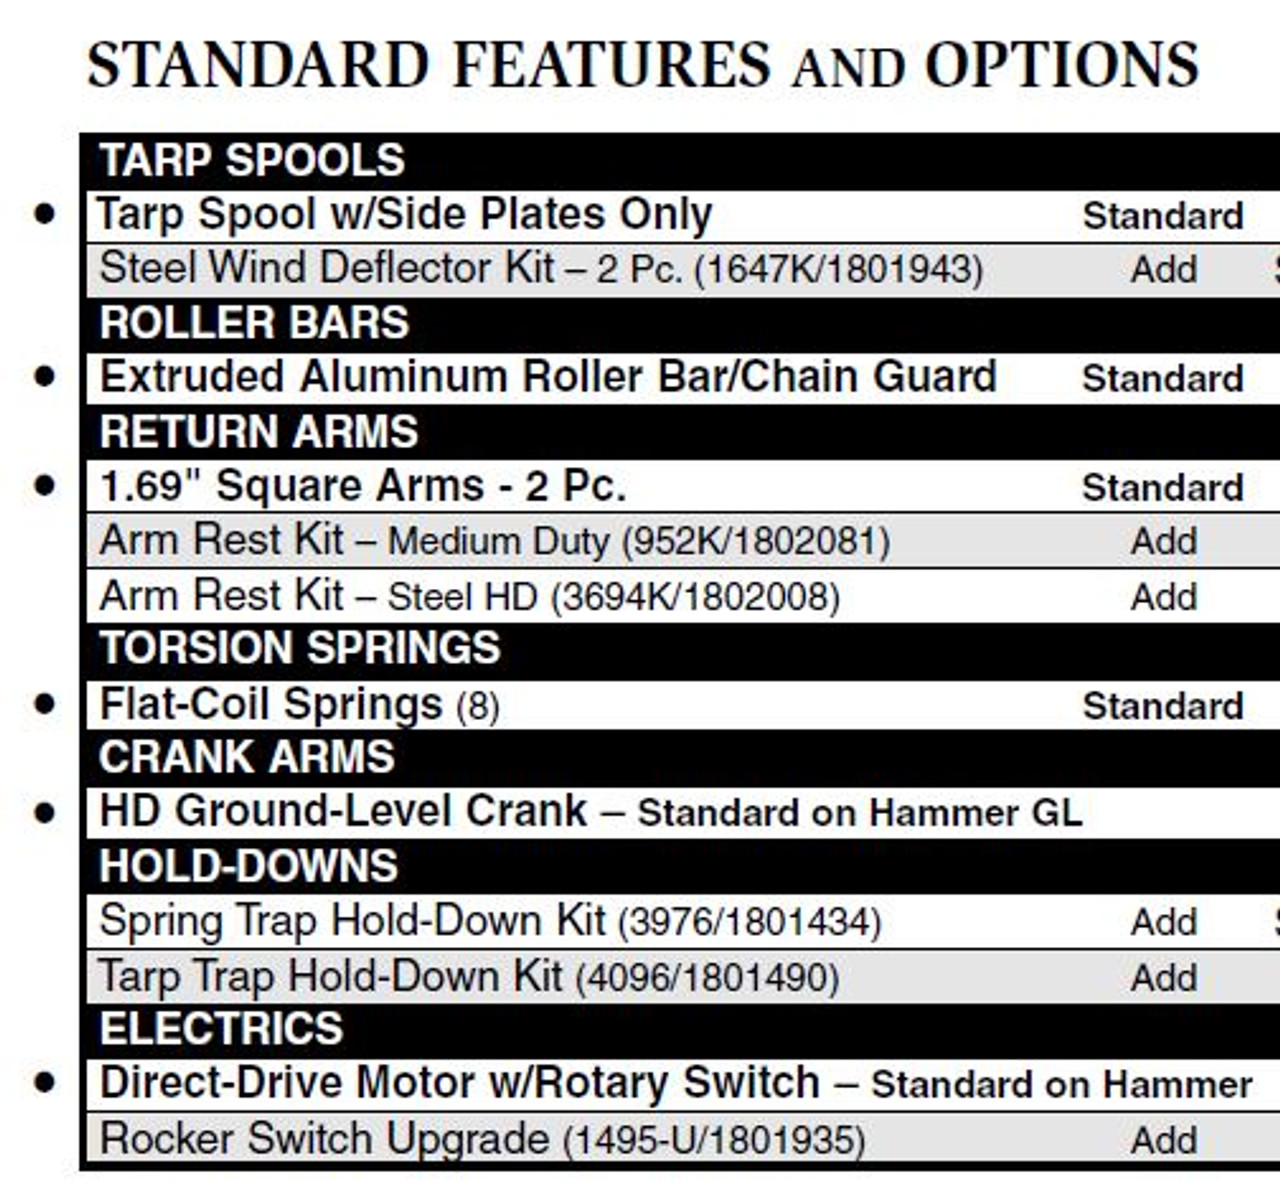 Hammer Standard Features and Options